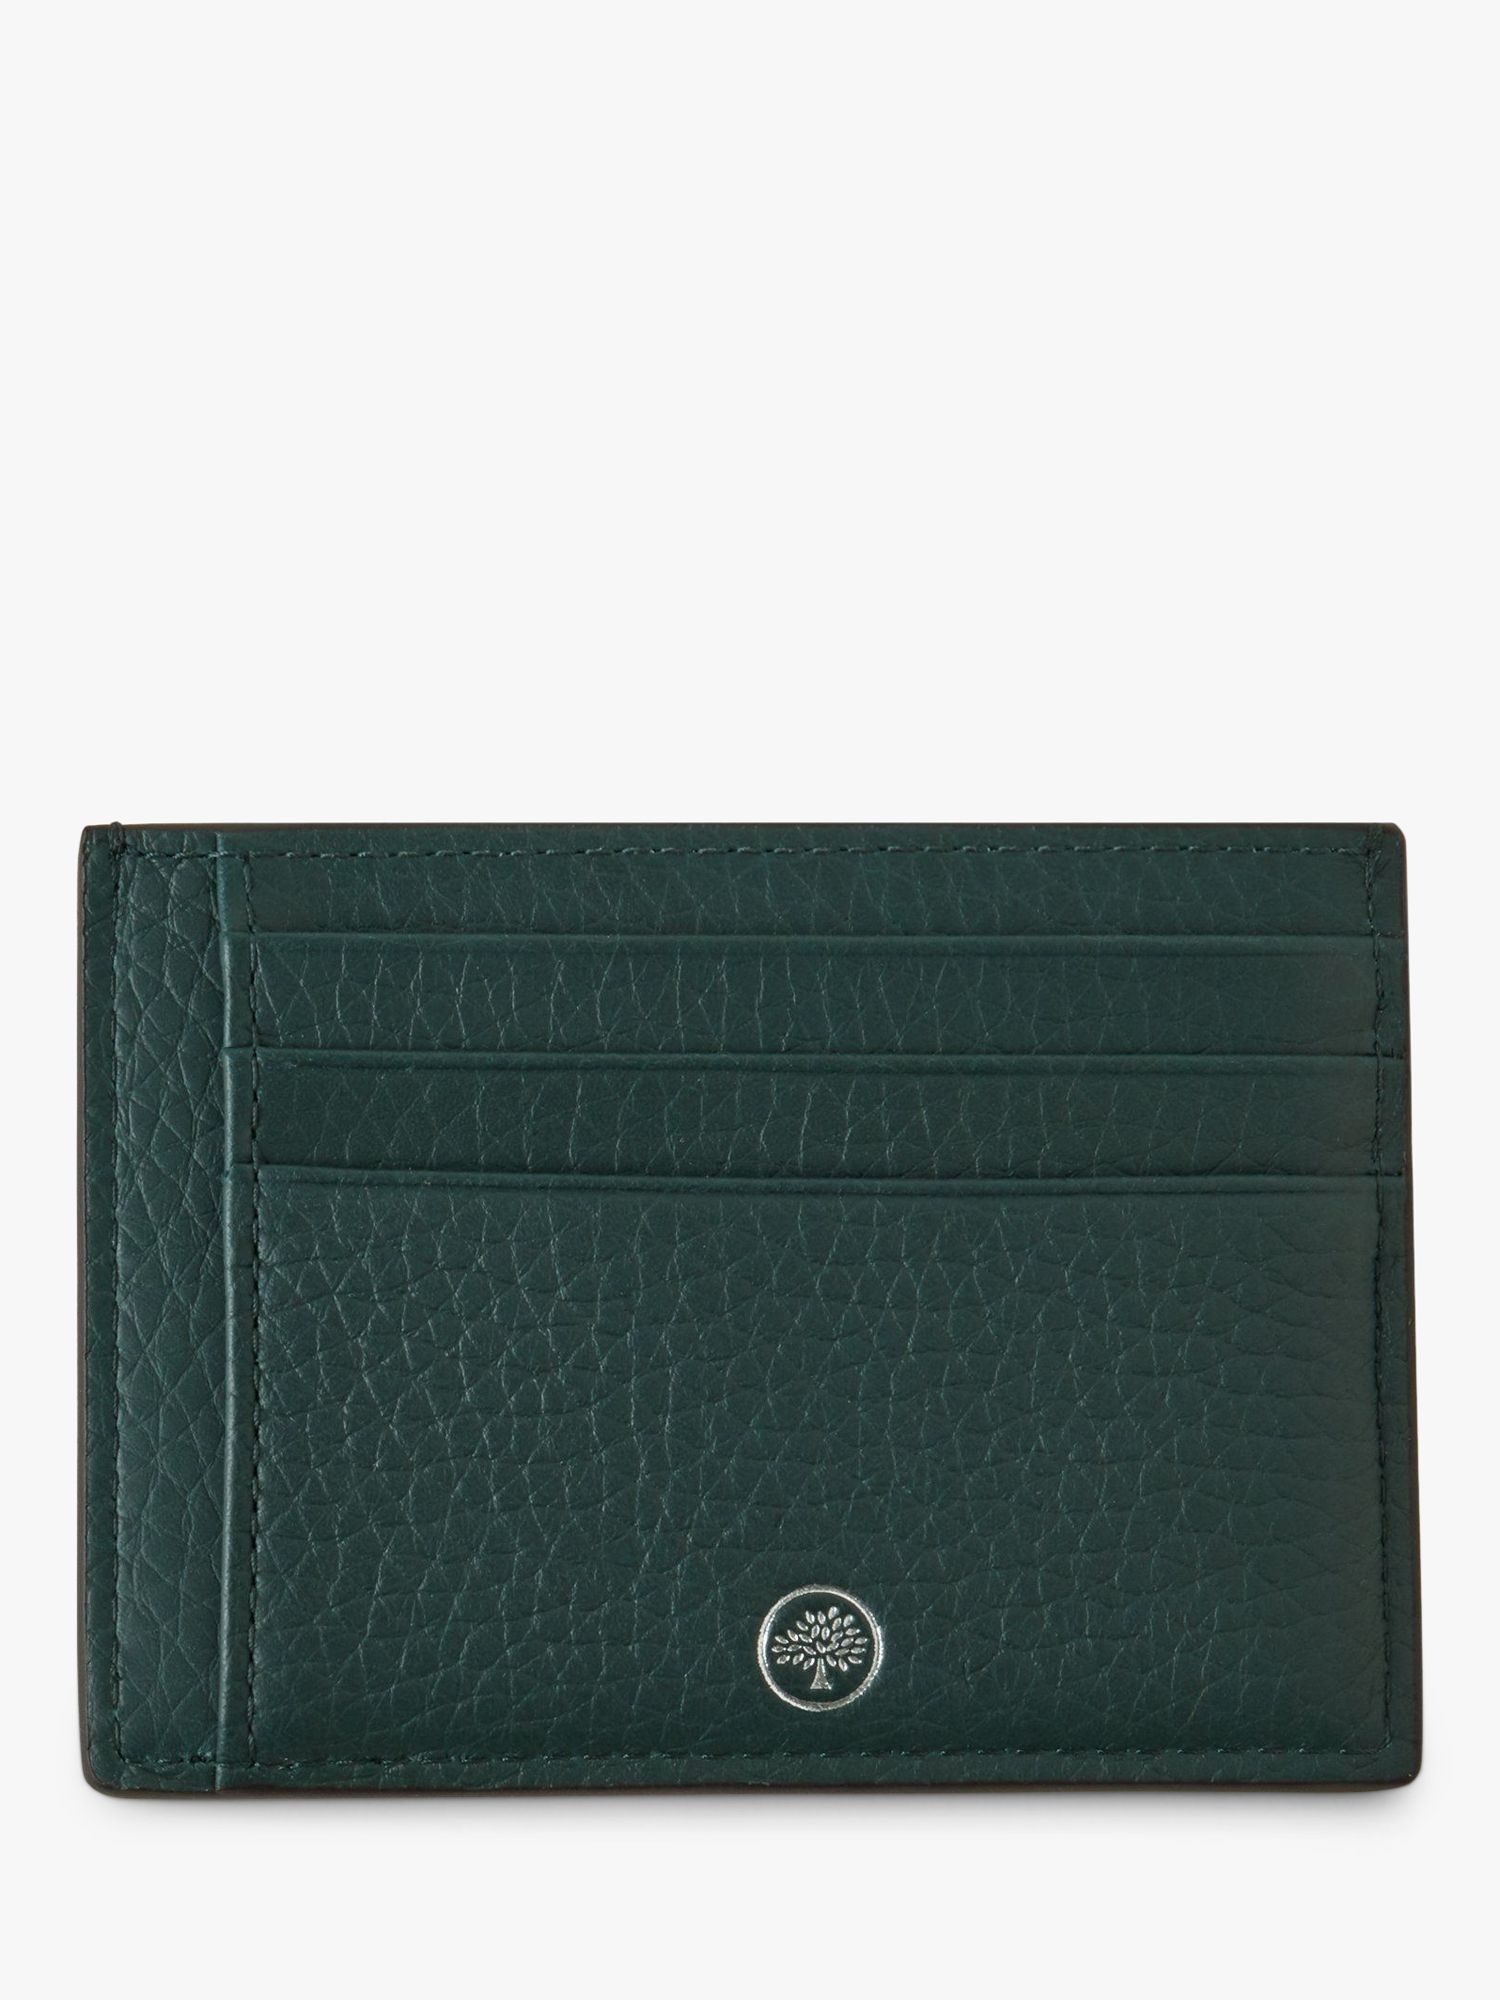 Mulberry Heavy Grain Leather Card Holder, Mulberry Green at John Lewis ...